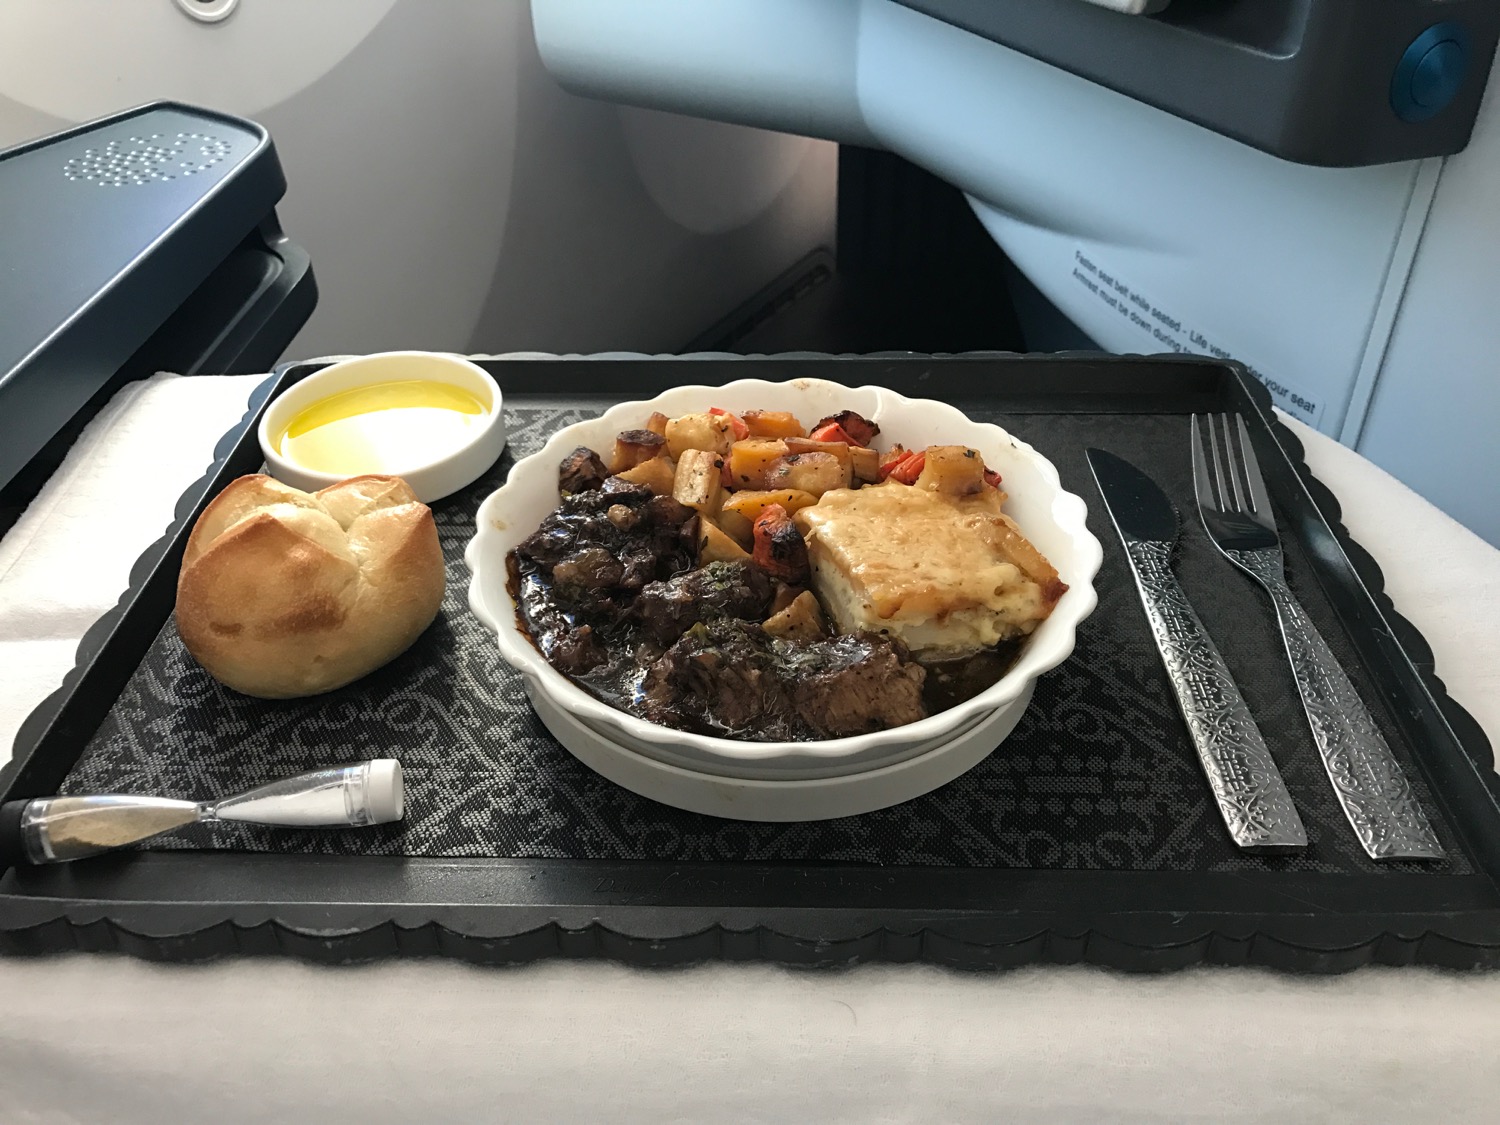 KLM 787 Business Class Review - 75